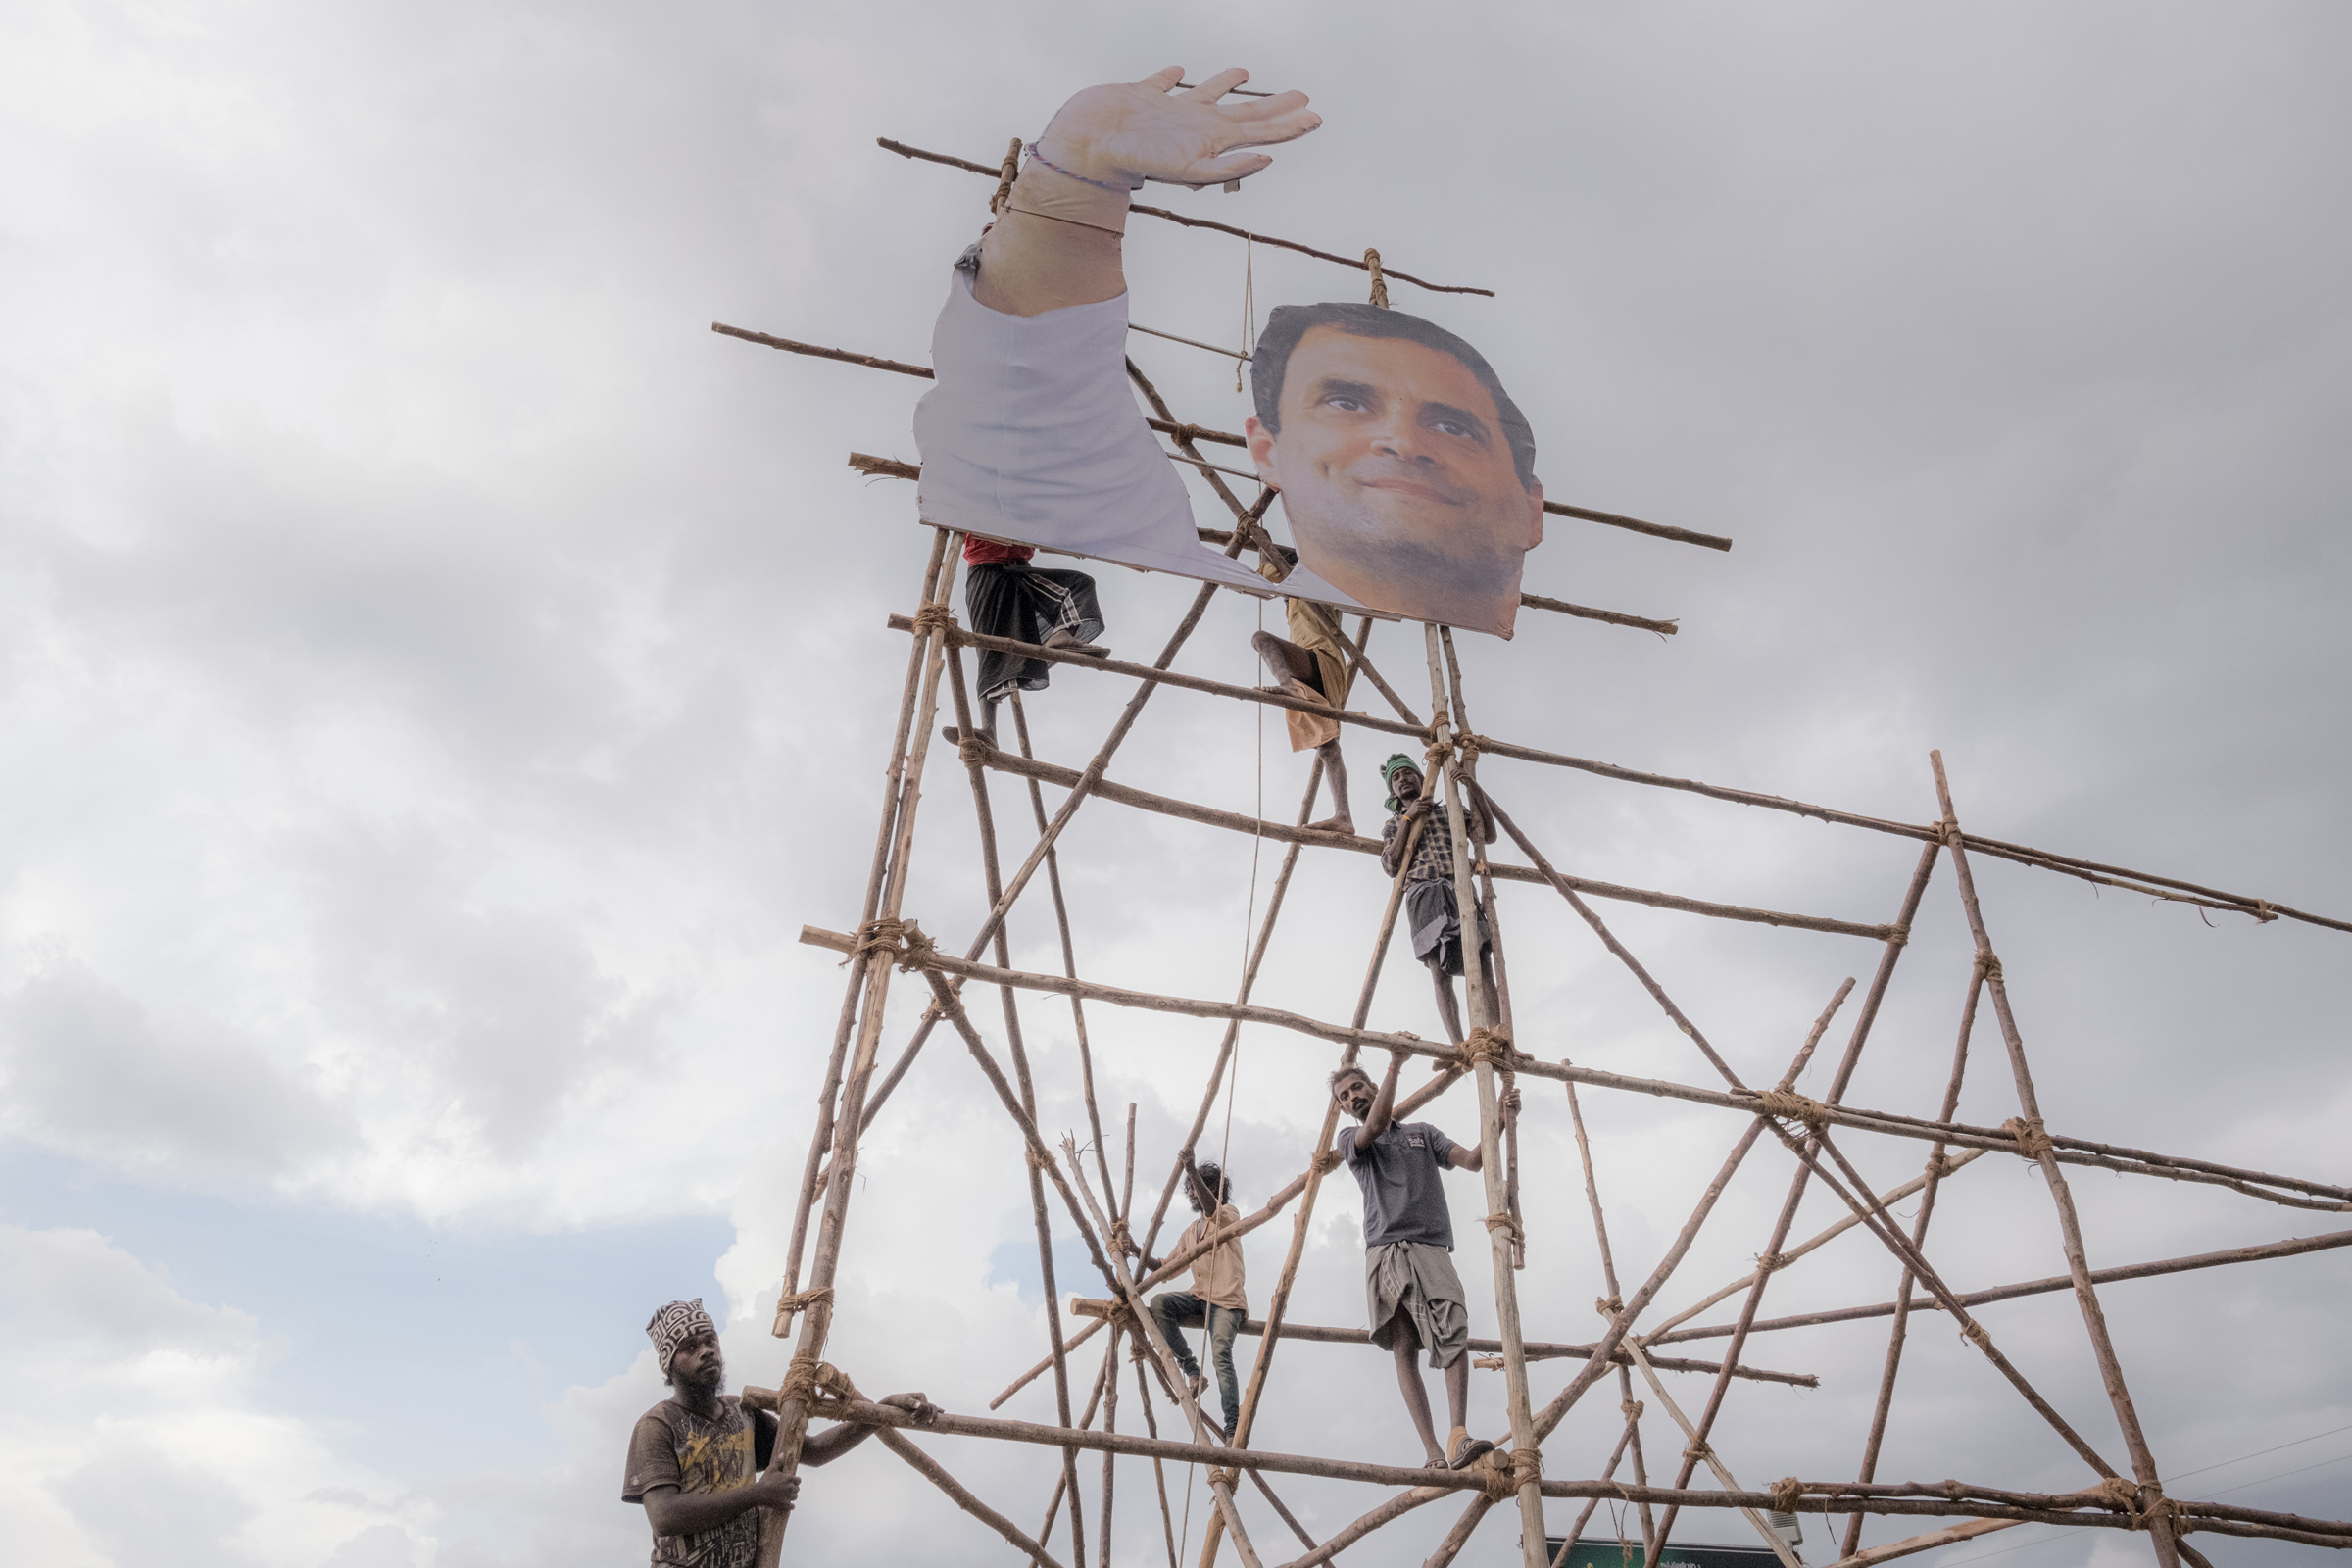 A cut-out of Indian politician Rahul Gandhi at the Bharat Jodo Yatra, or Unite India March, in October 2022 in Karnataka, India. (Ronny Sen for TIME)